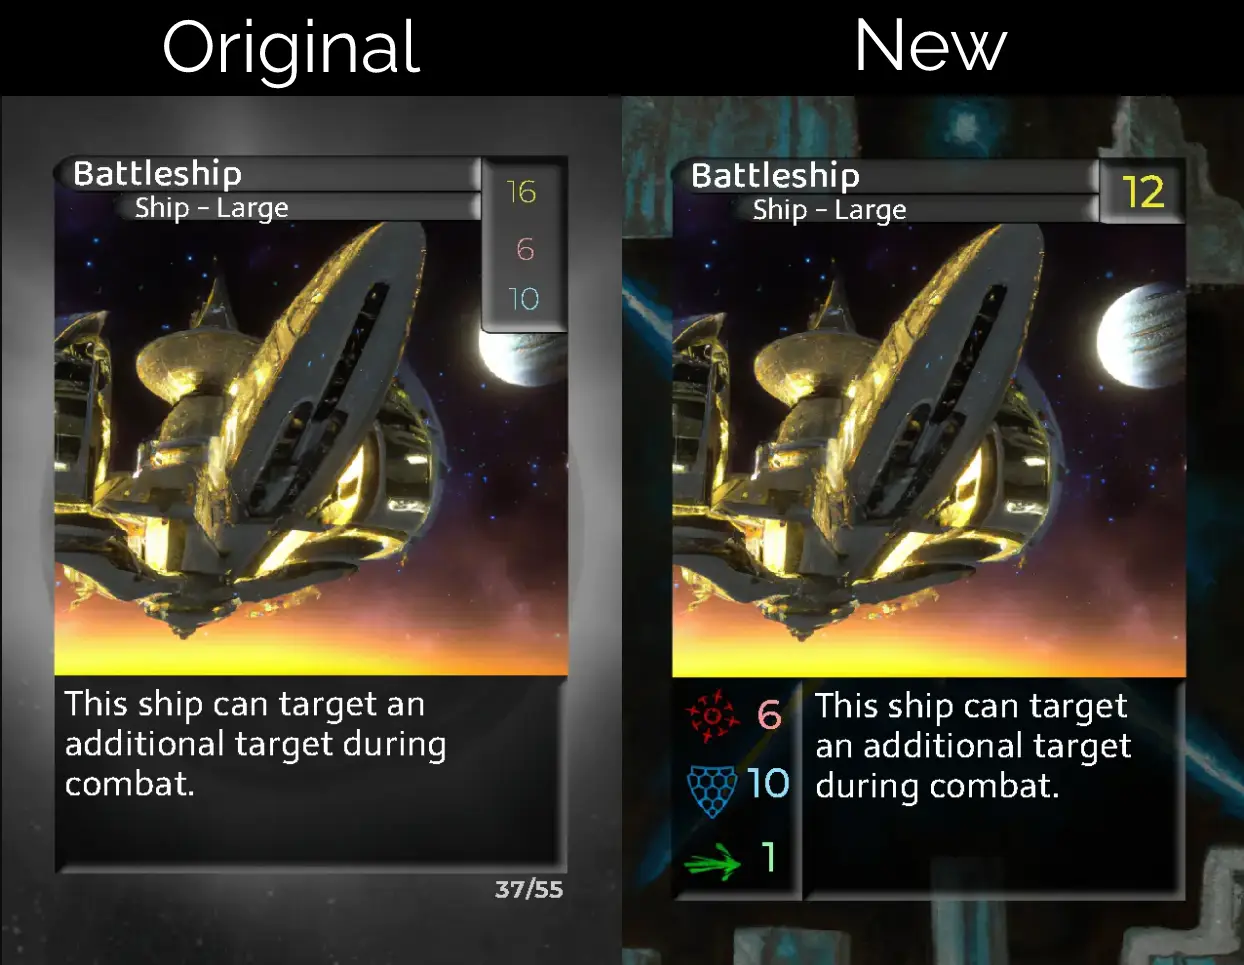 The previous and new ship card design